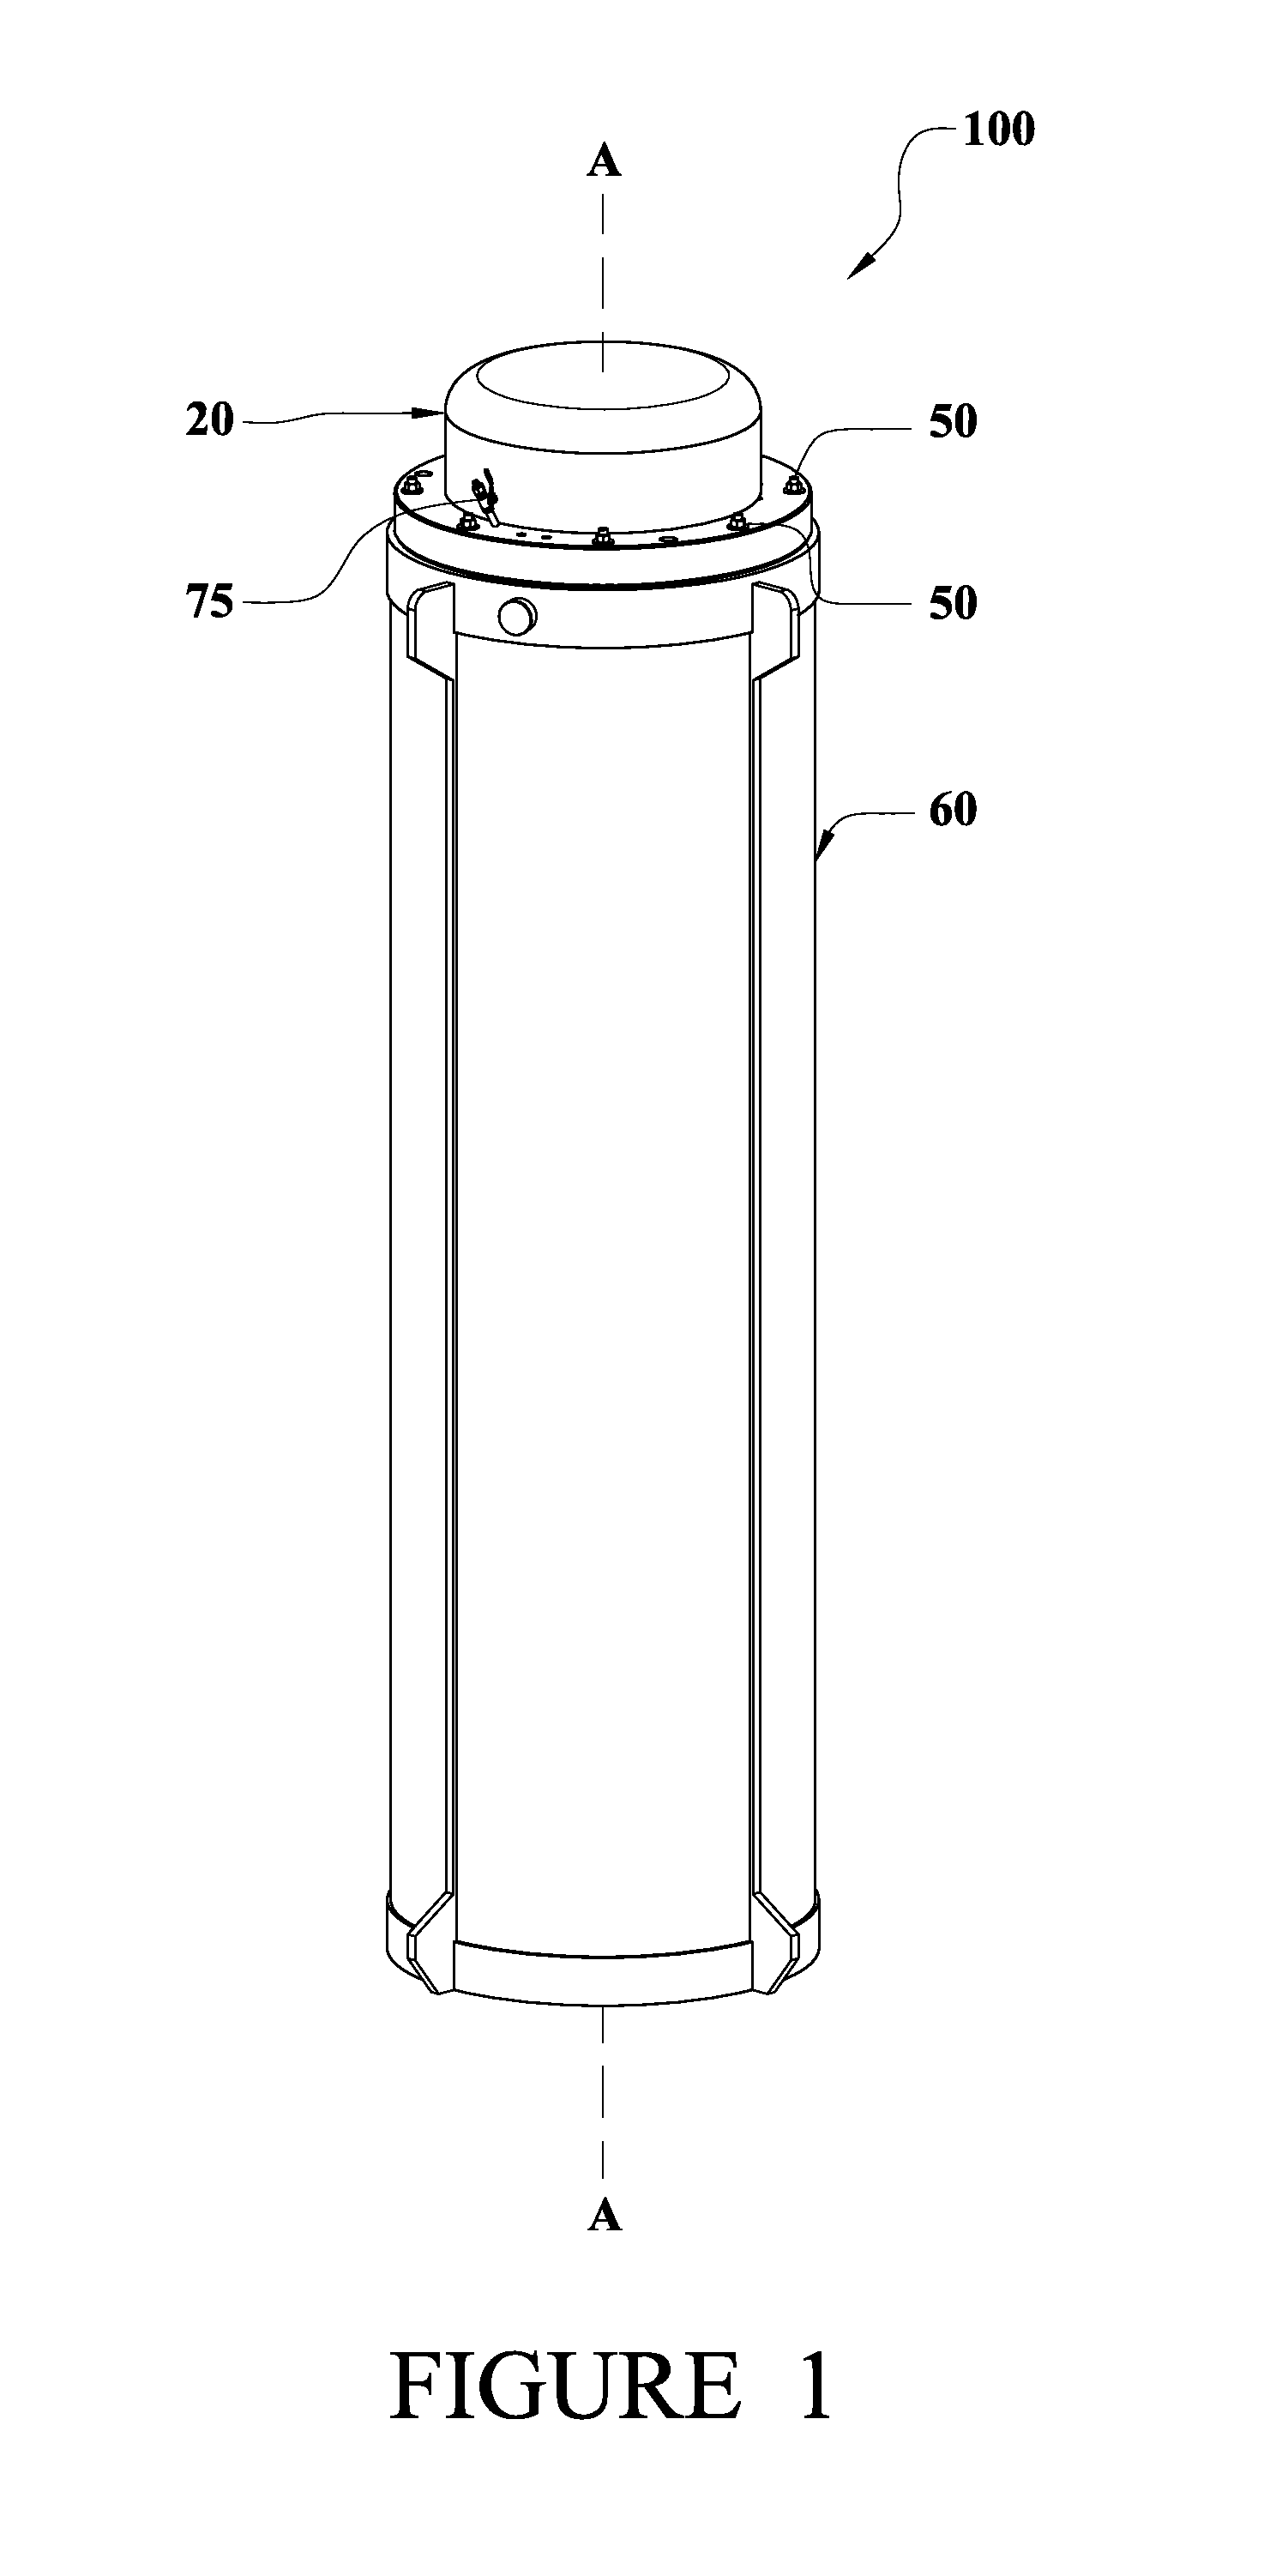 Method of transferring high level radionactive materials, and system for the same